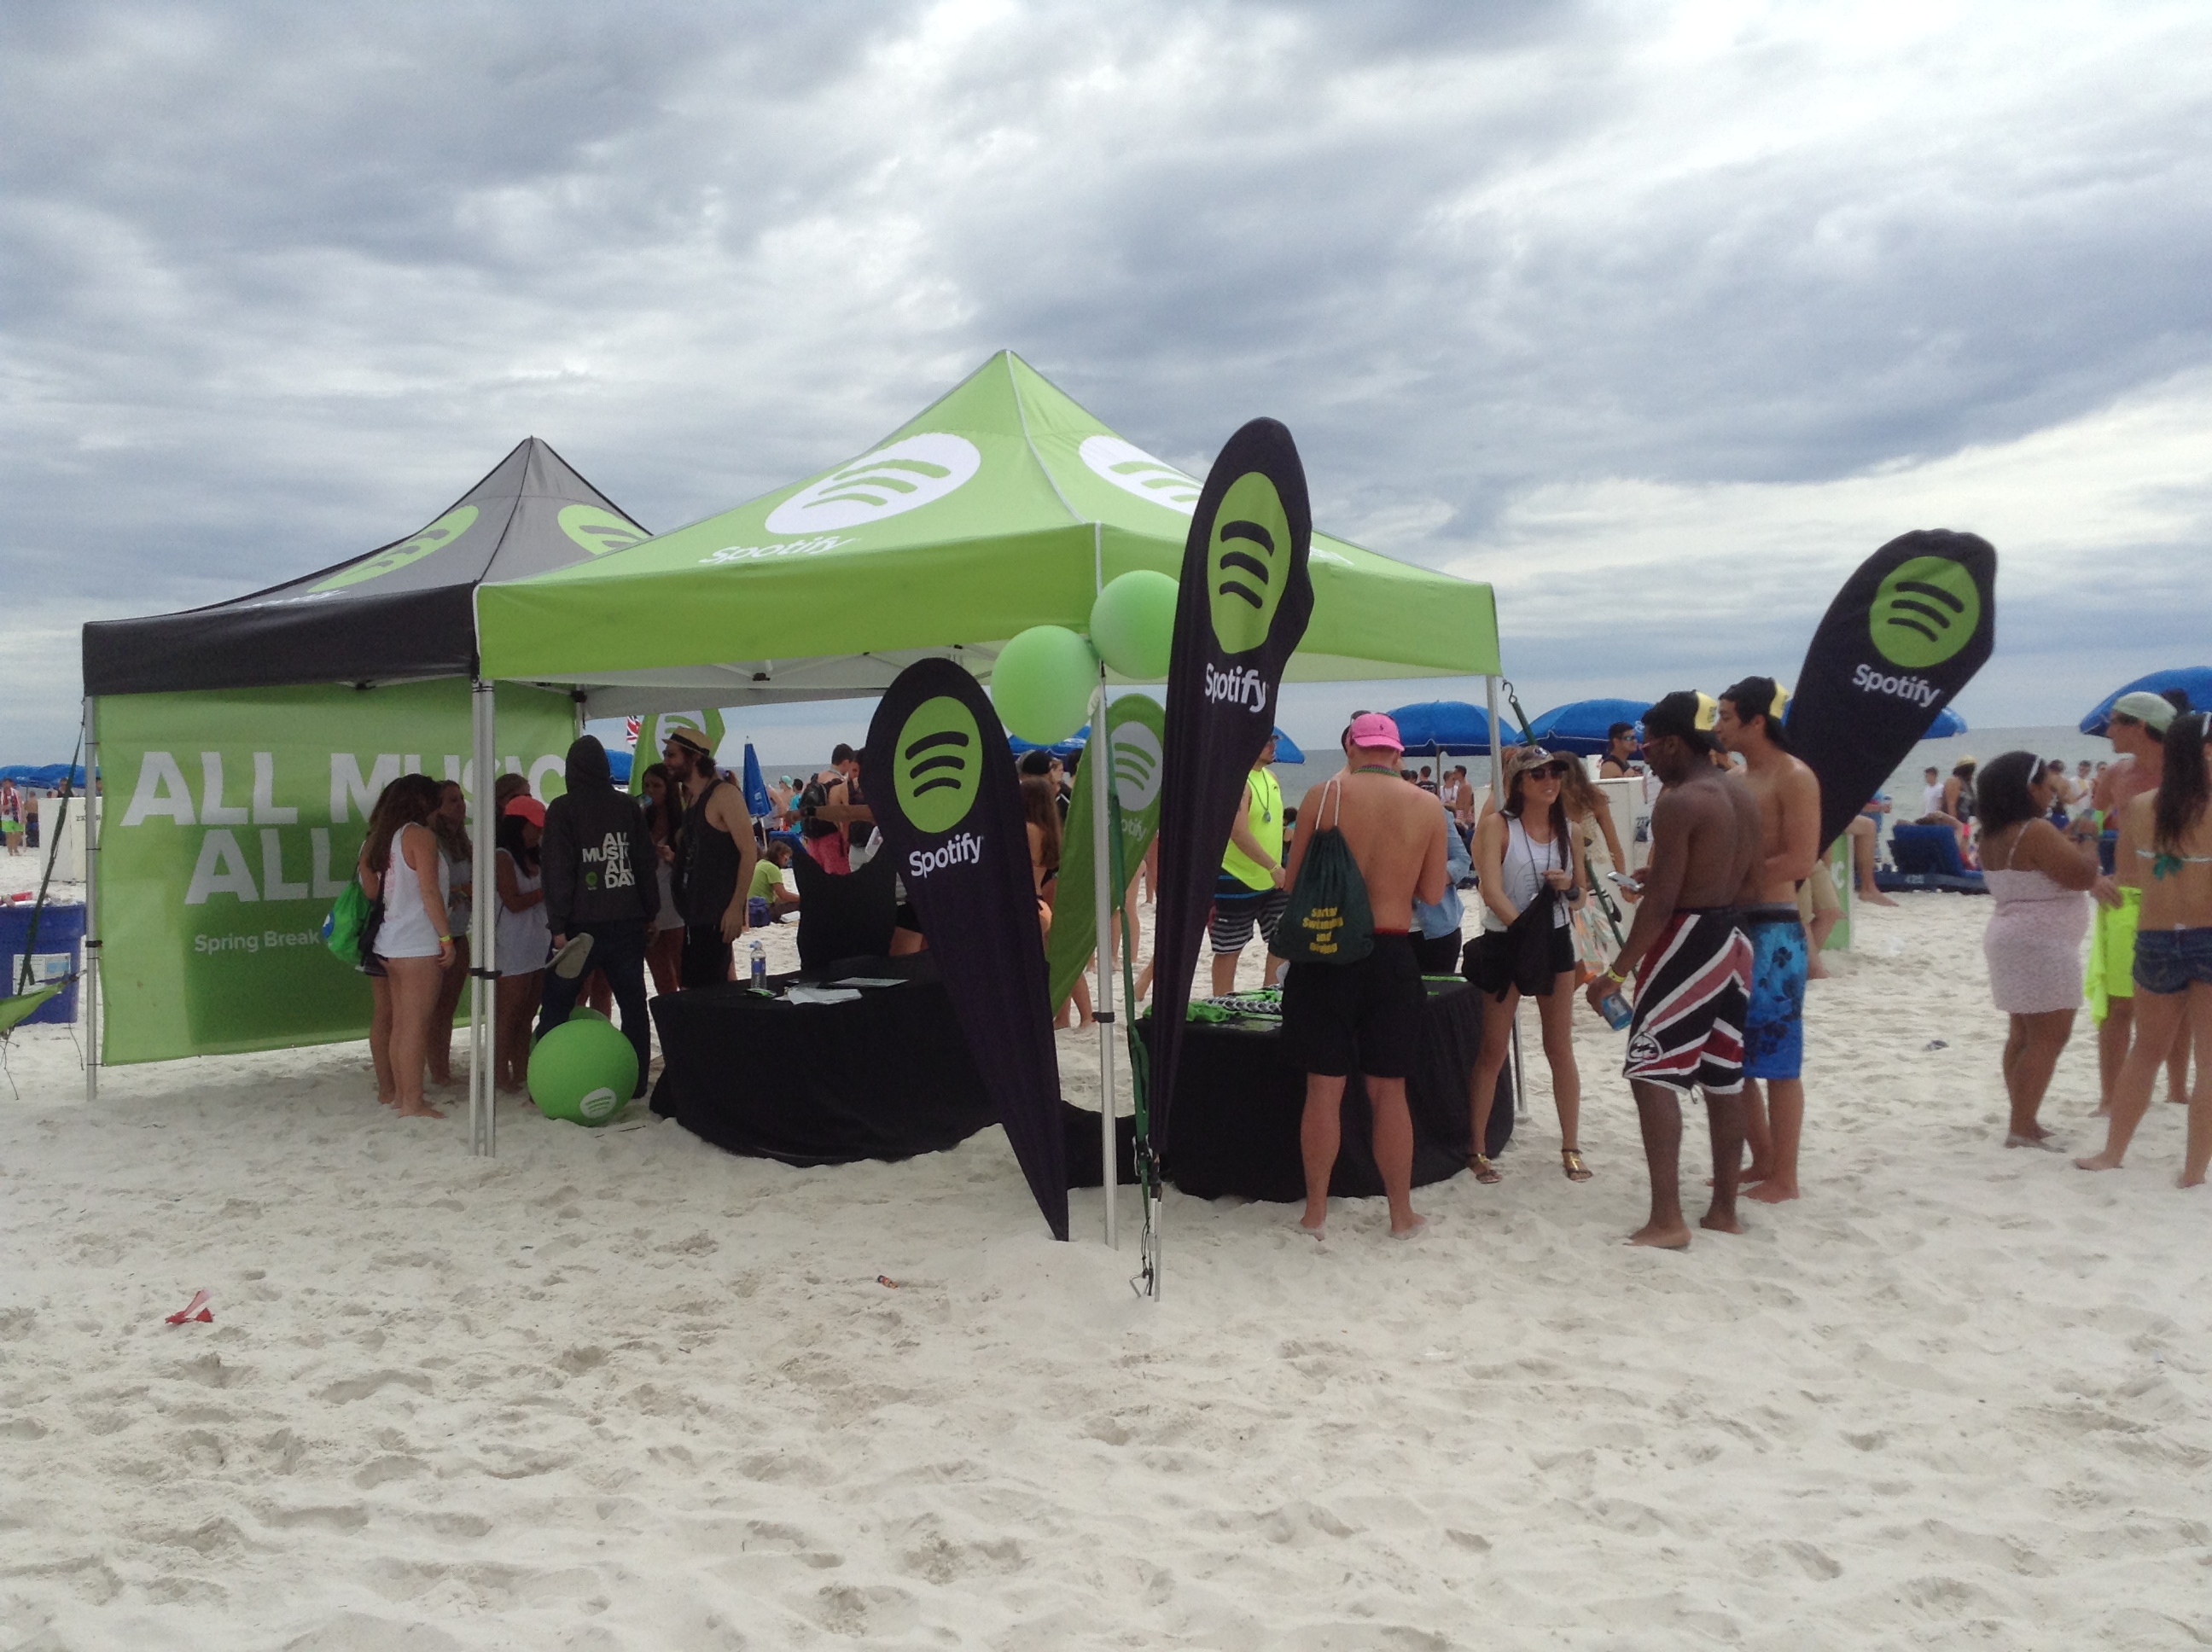 Spotify Promotional Flags and Branded Tent